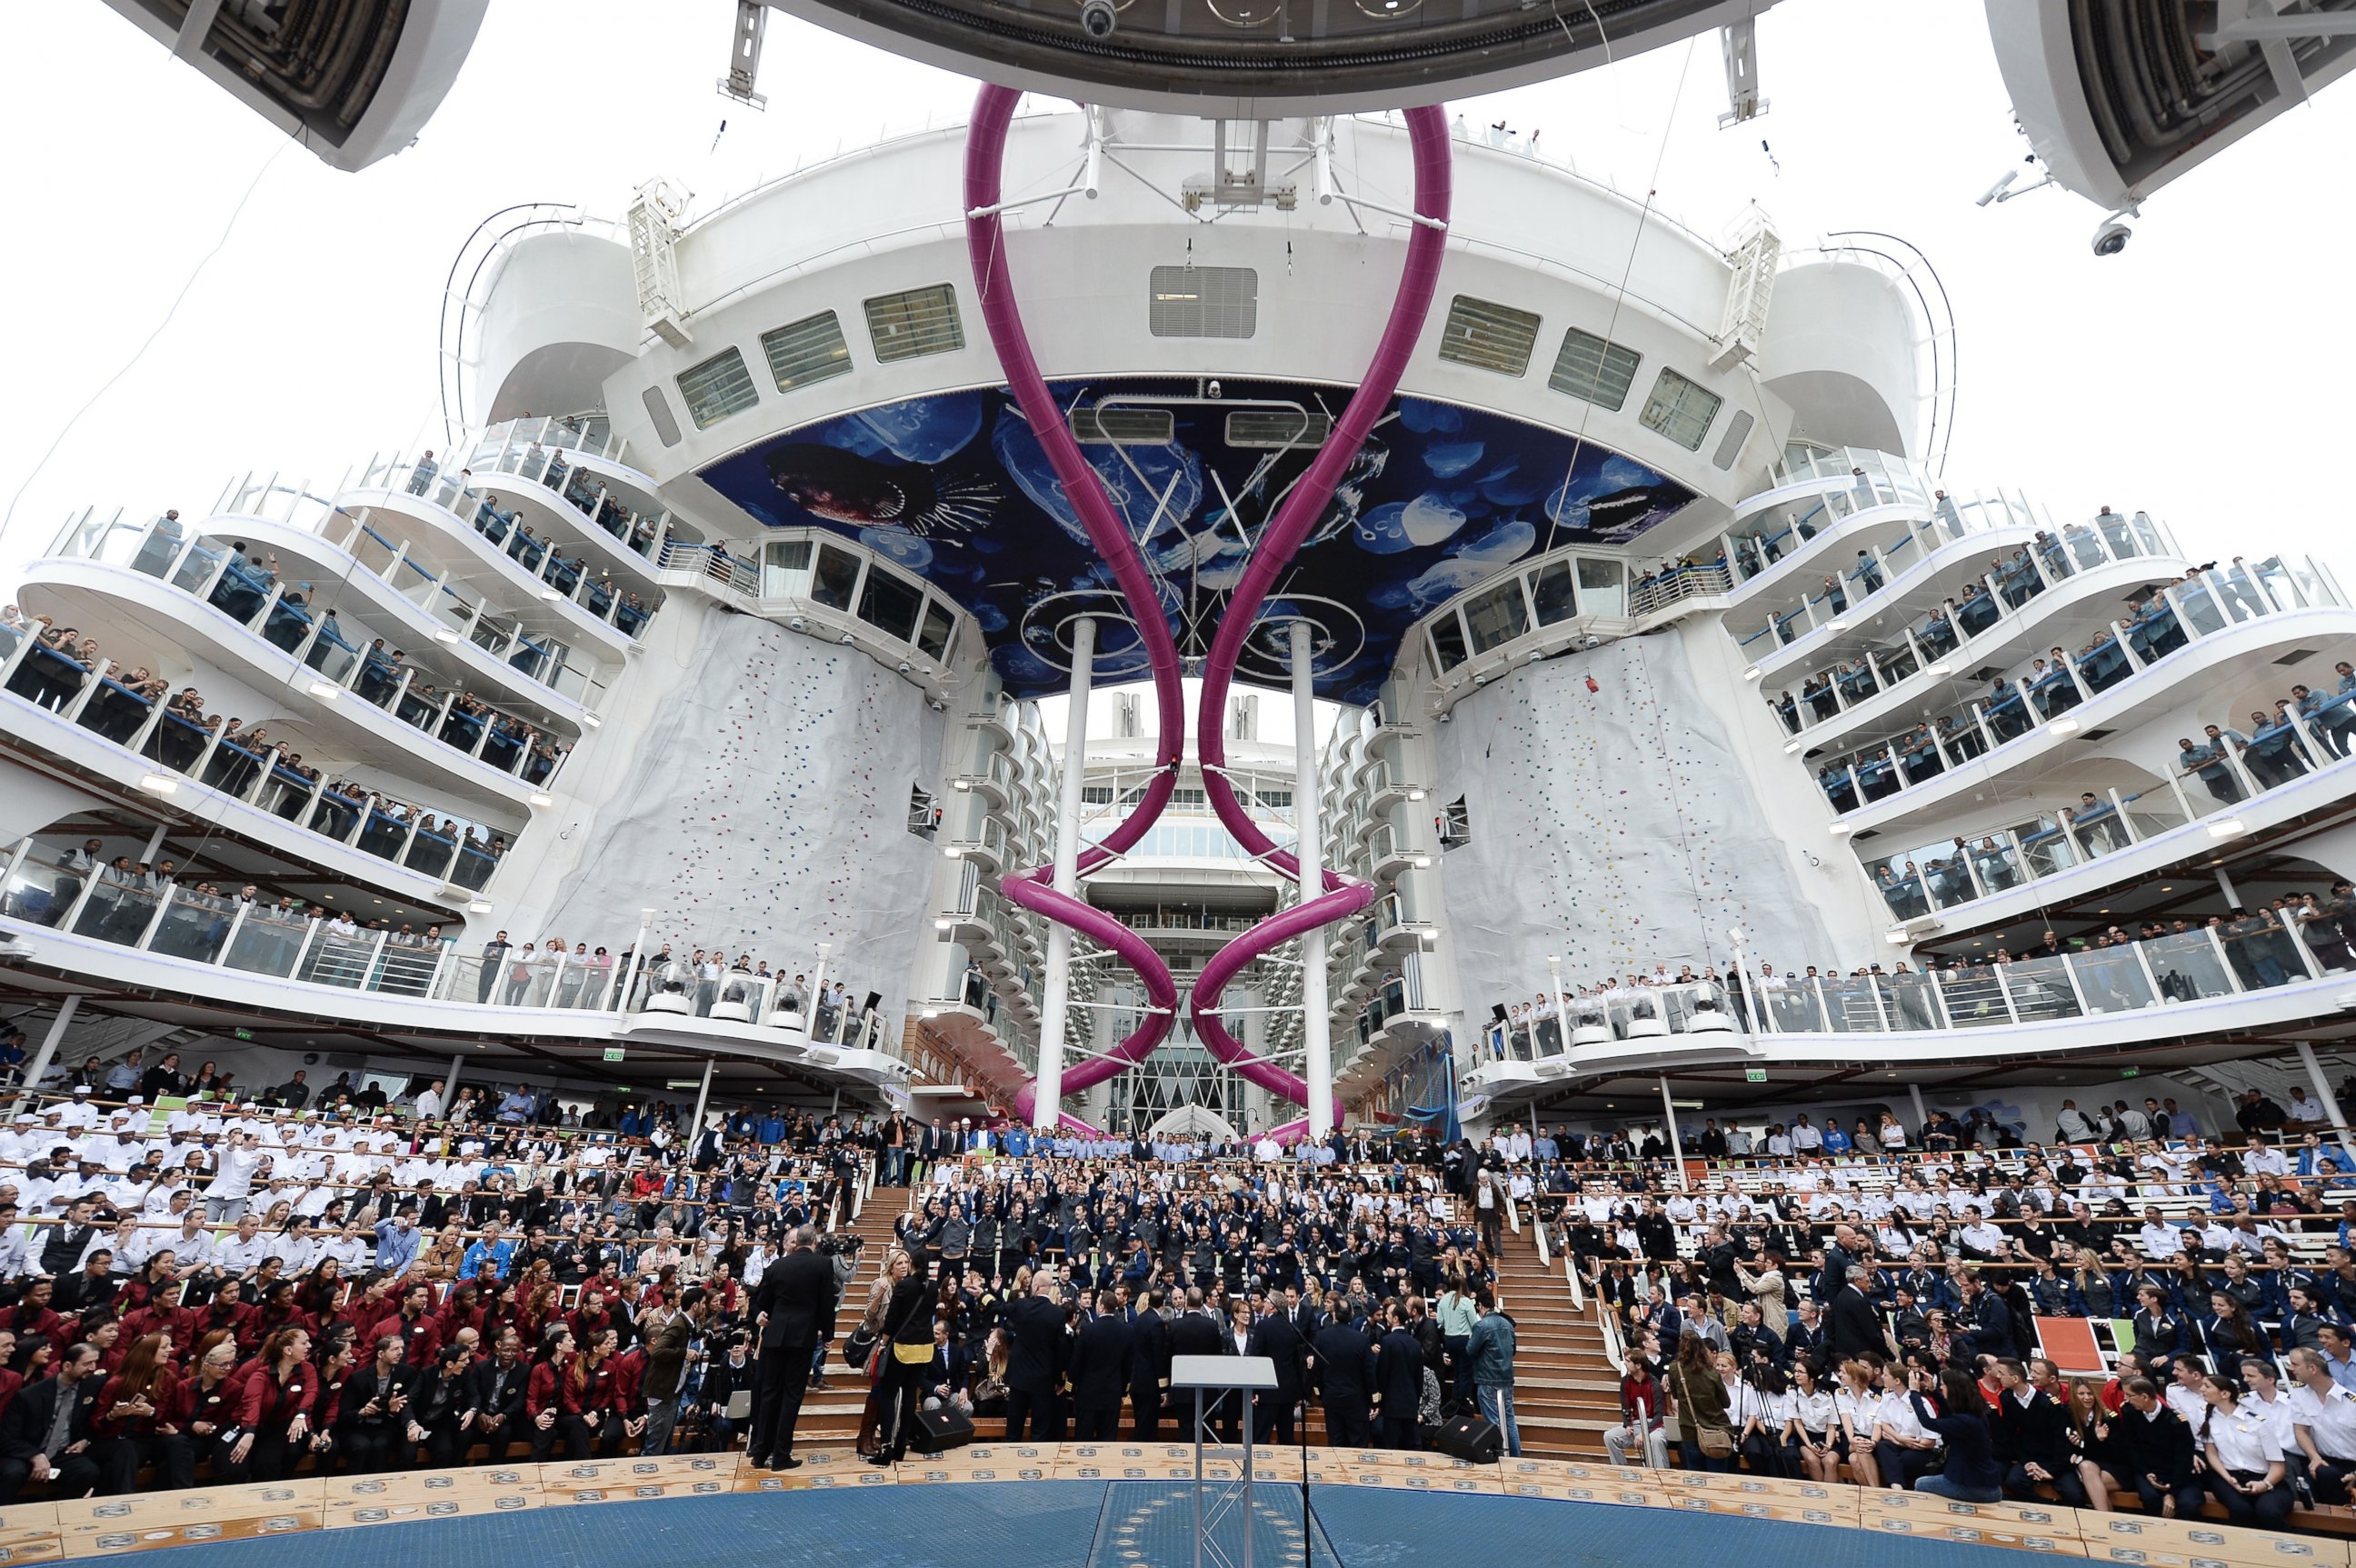 PHOTO: Crew members of the Harmony of the Seas cruise ship are pictured at the STX shipyard of Saint-Nazaire, western France on May 12, 2016 as they attend the delivery ceremony of the boat.